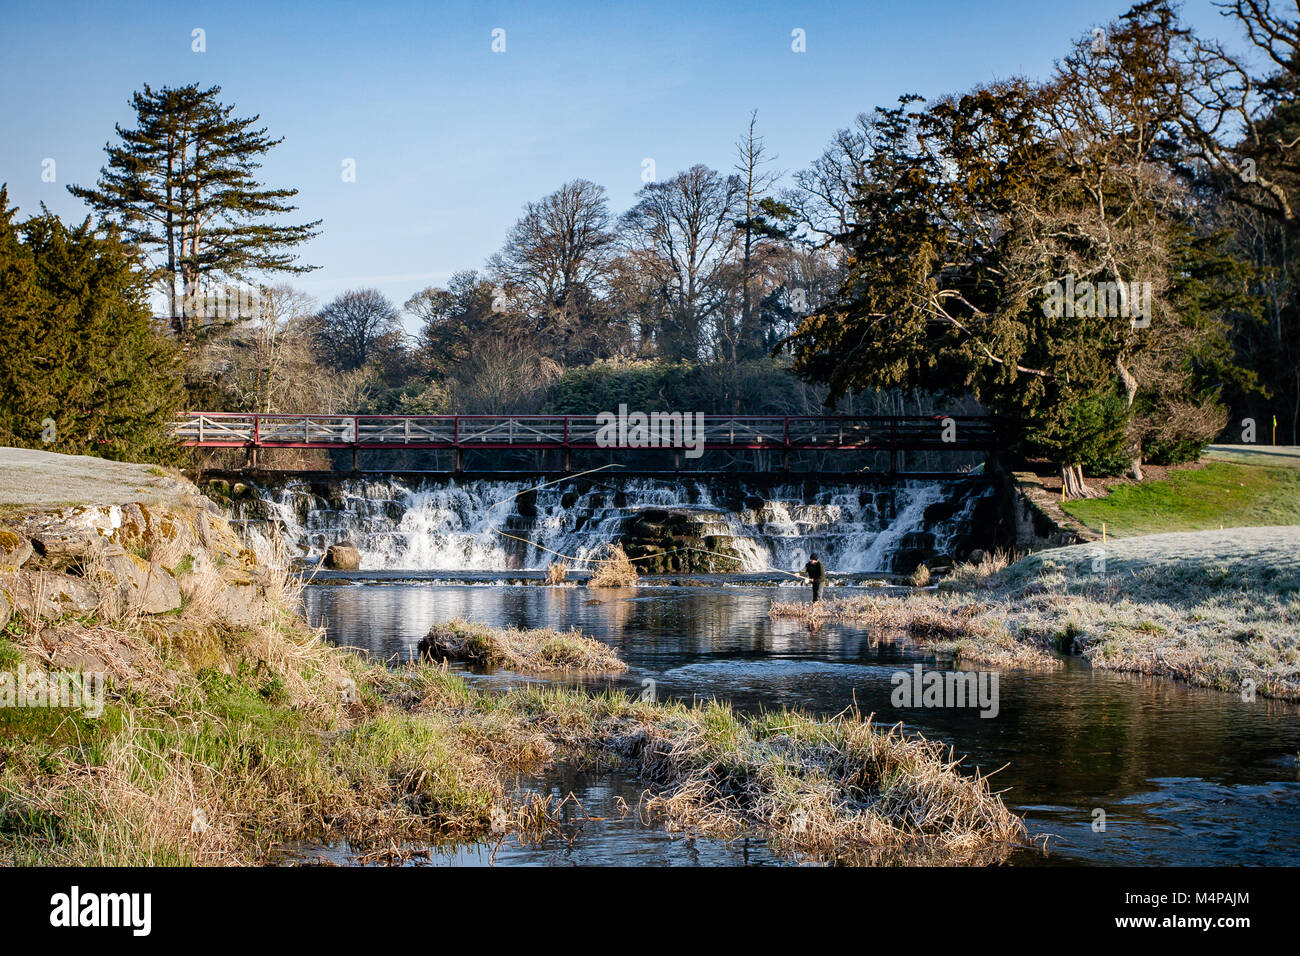 Man angler fly fishing at the Salmon Leap Weir on The River Rye in Carton House, Maynooth, County Kildare, Ireland Stock Photo